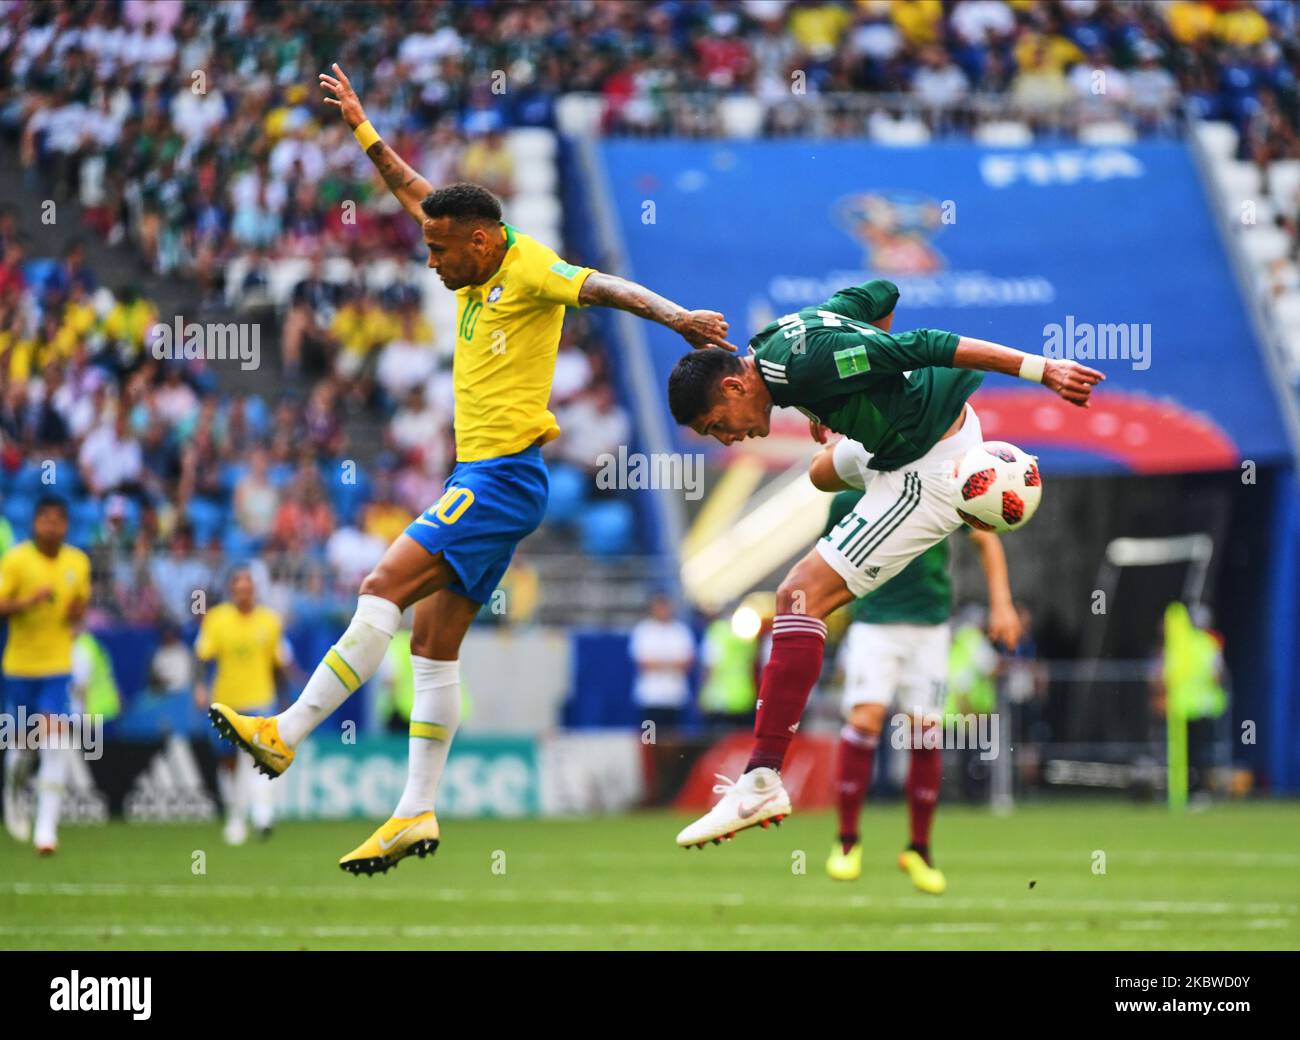 Neymar of Brazil and Jesus Corona of Mexico fighting for the ball during the FIFA World Cup match Brazil versus Mexico at Samara Arena, Samara, Russia on July 2, 2018. (Photo by Ulrik Pedersen/NurPhoto) Stock Photo